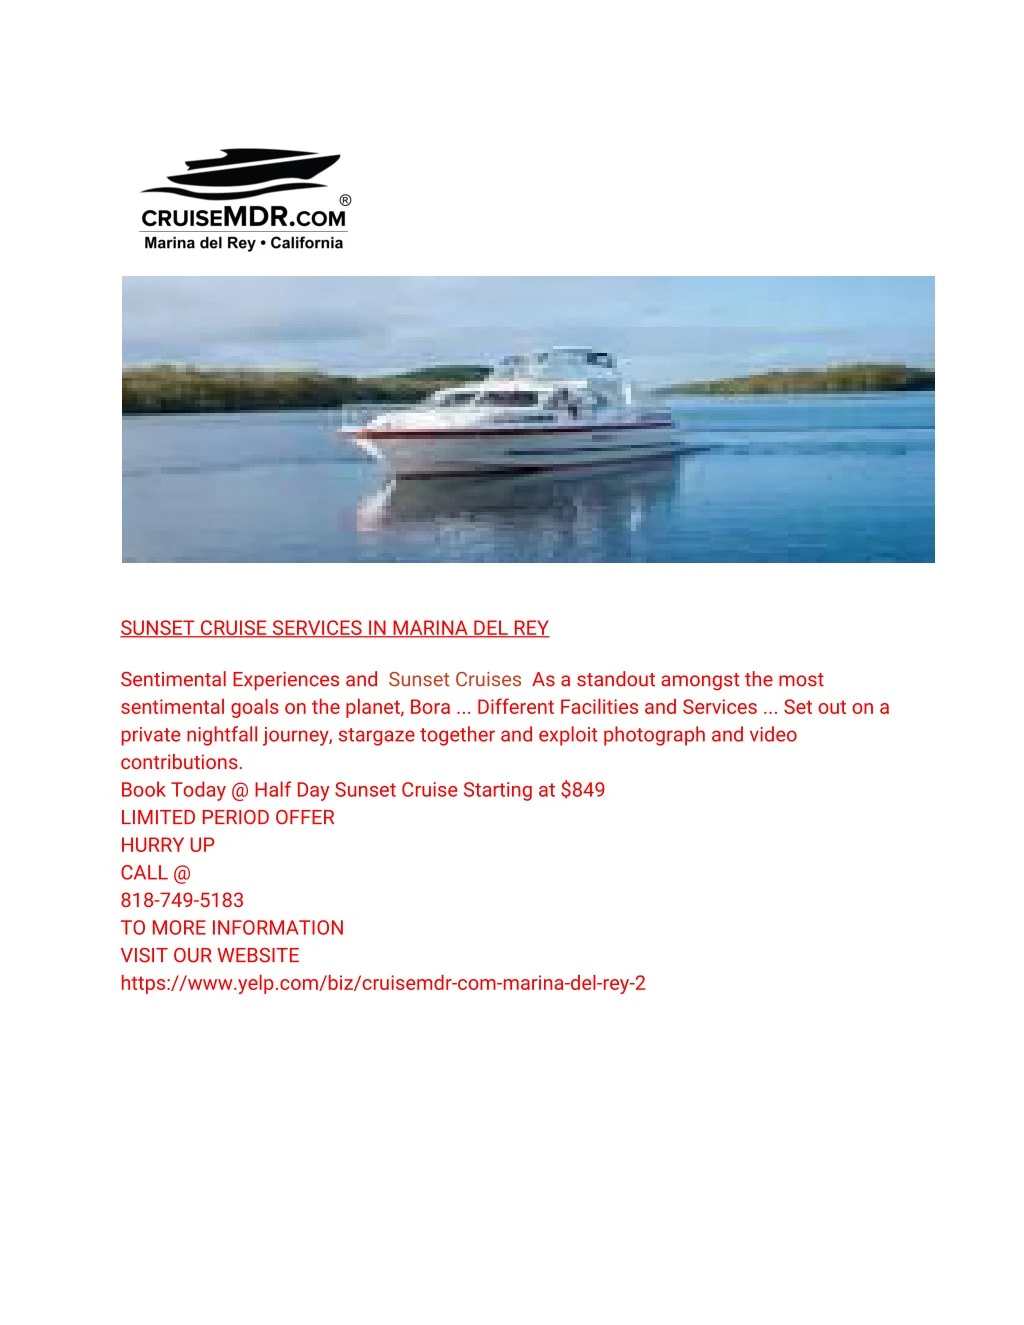 sunset cruise services in marina